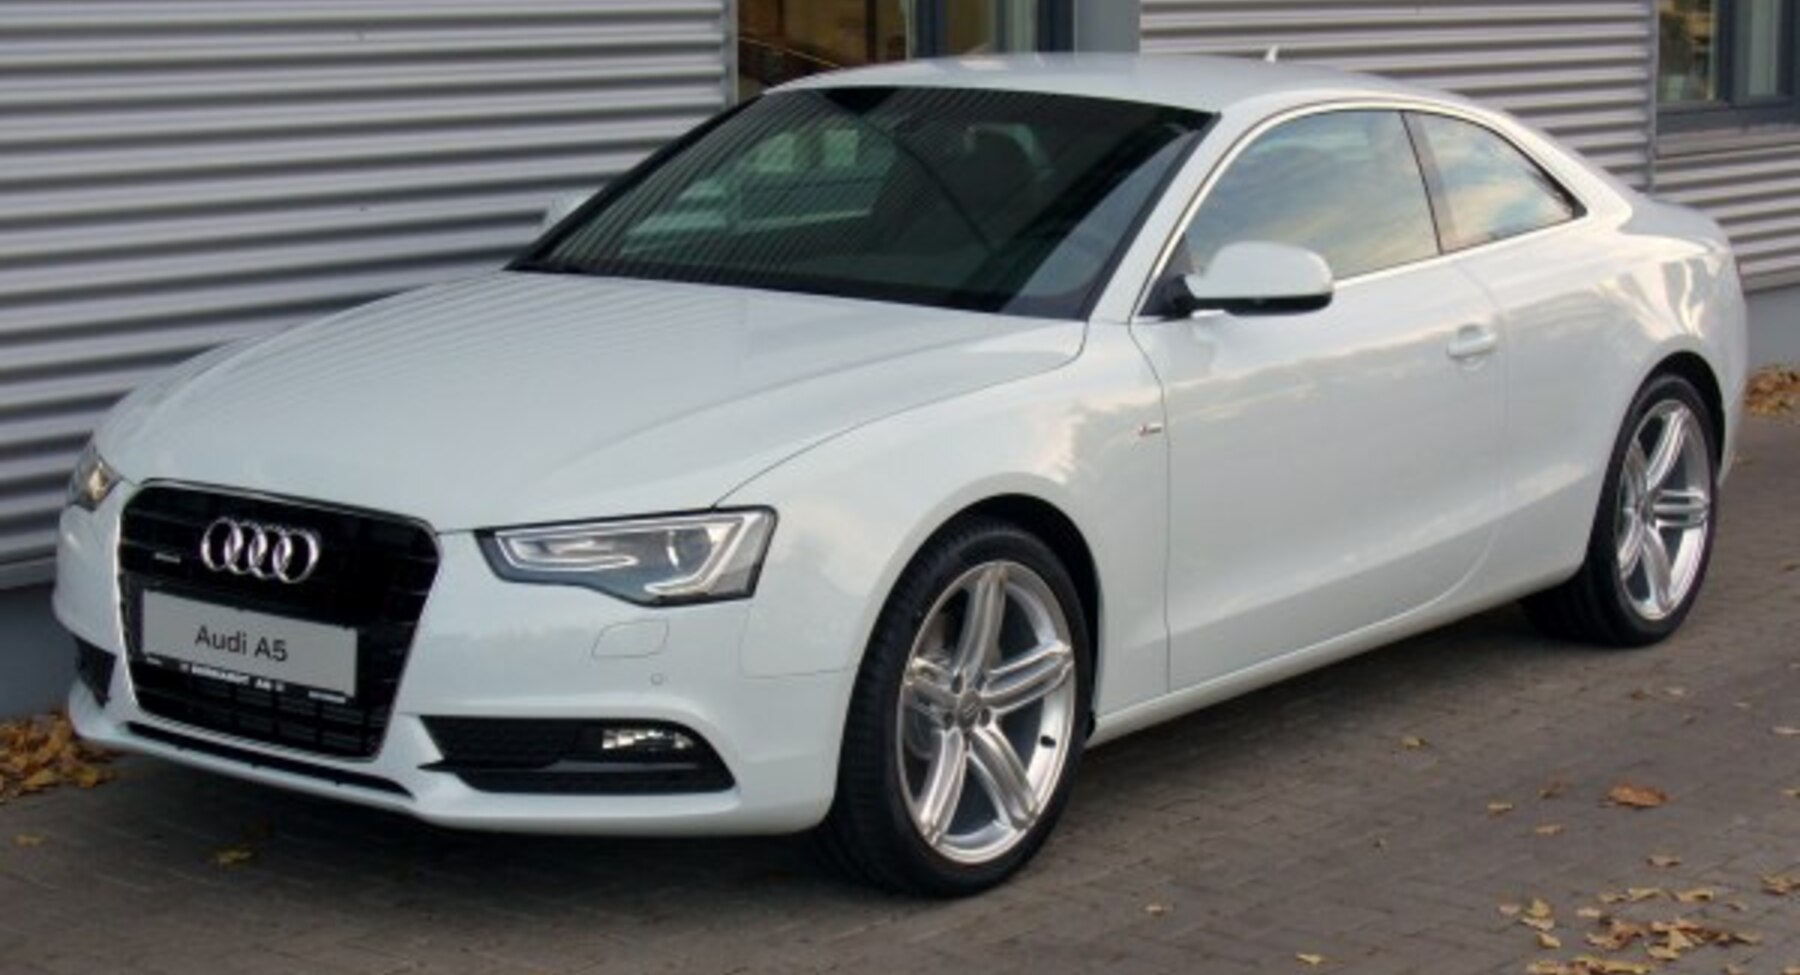 Audi A5 Coupe (8T3, facelift 2011) 2.0 TDI clean diesel (190 Hp) quattro S tronic 2014, 2015, 2016 